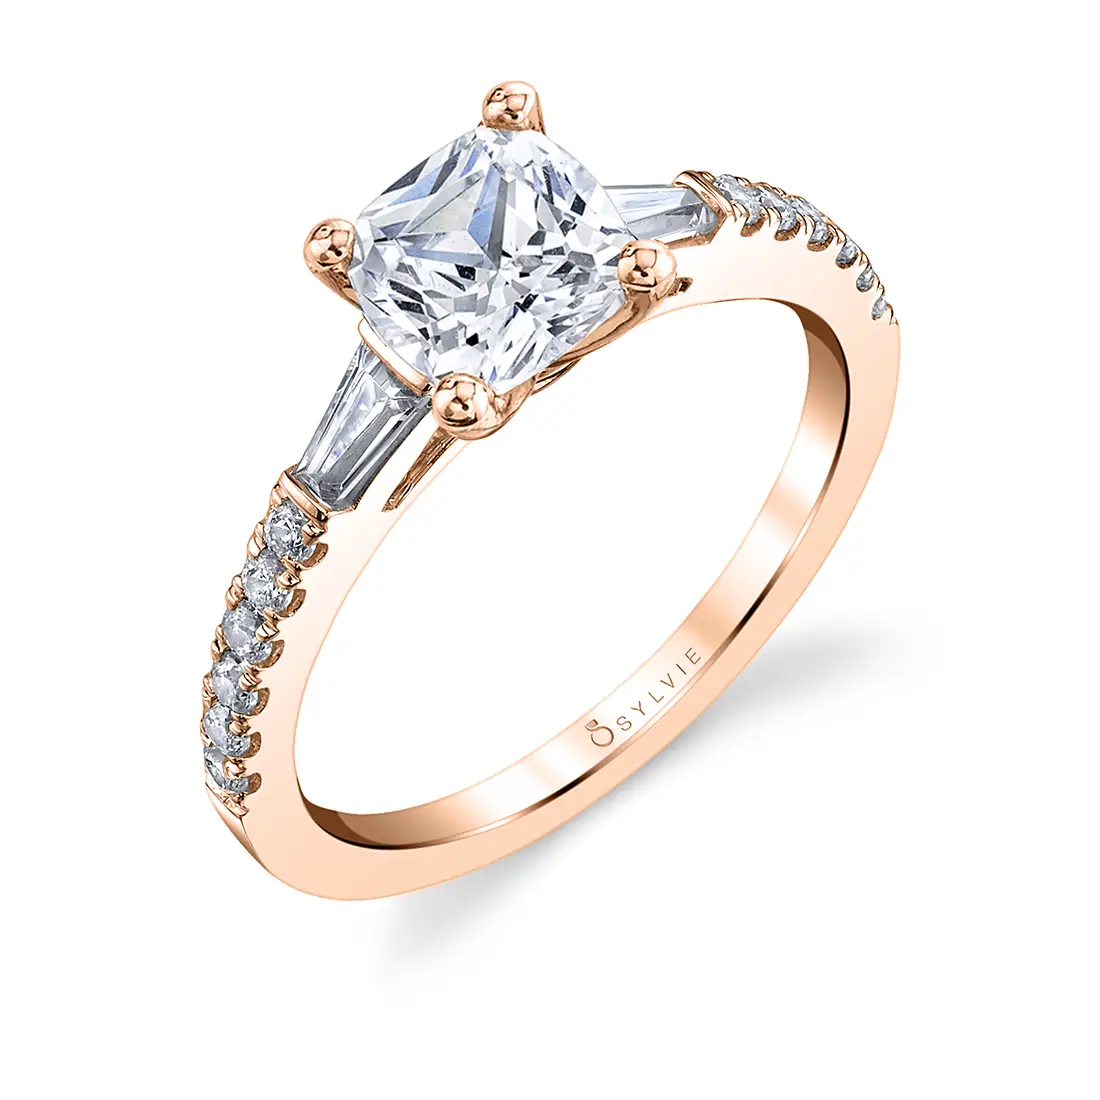 Cushion Cut Engagement Ring with Baguettes in rose gold